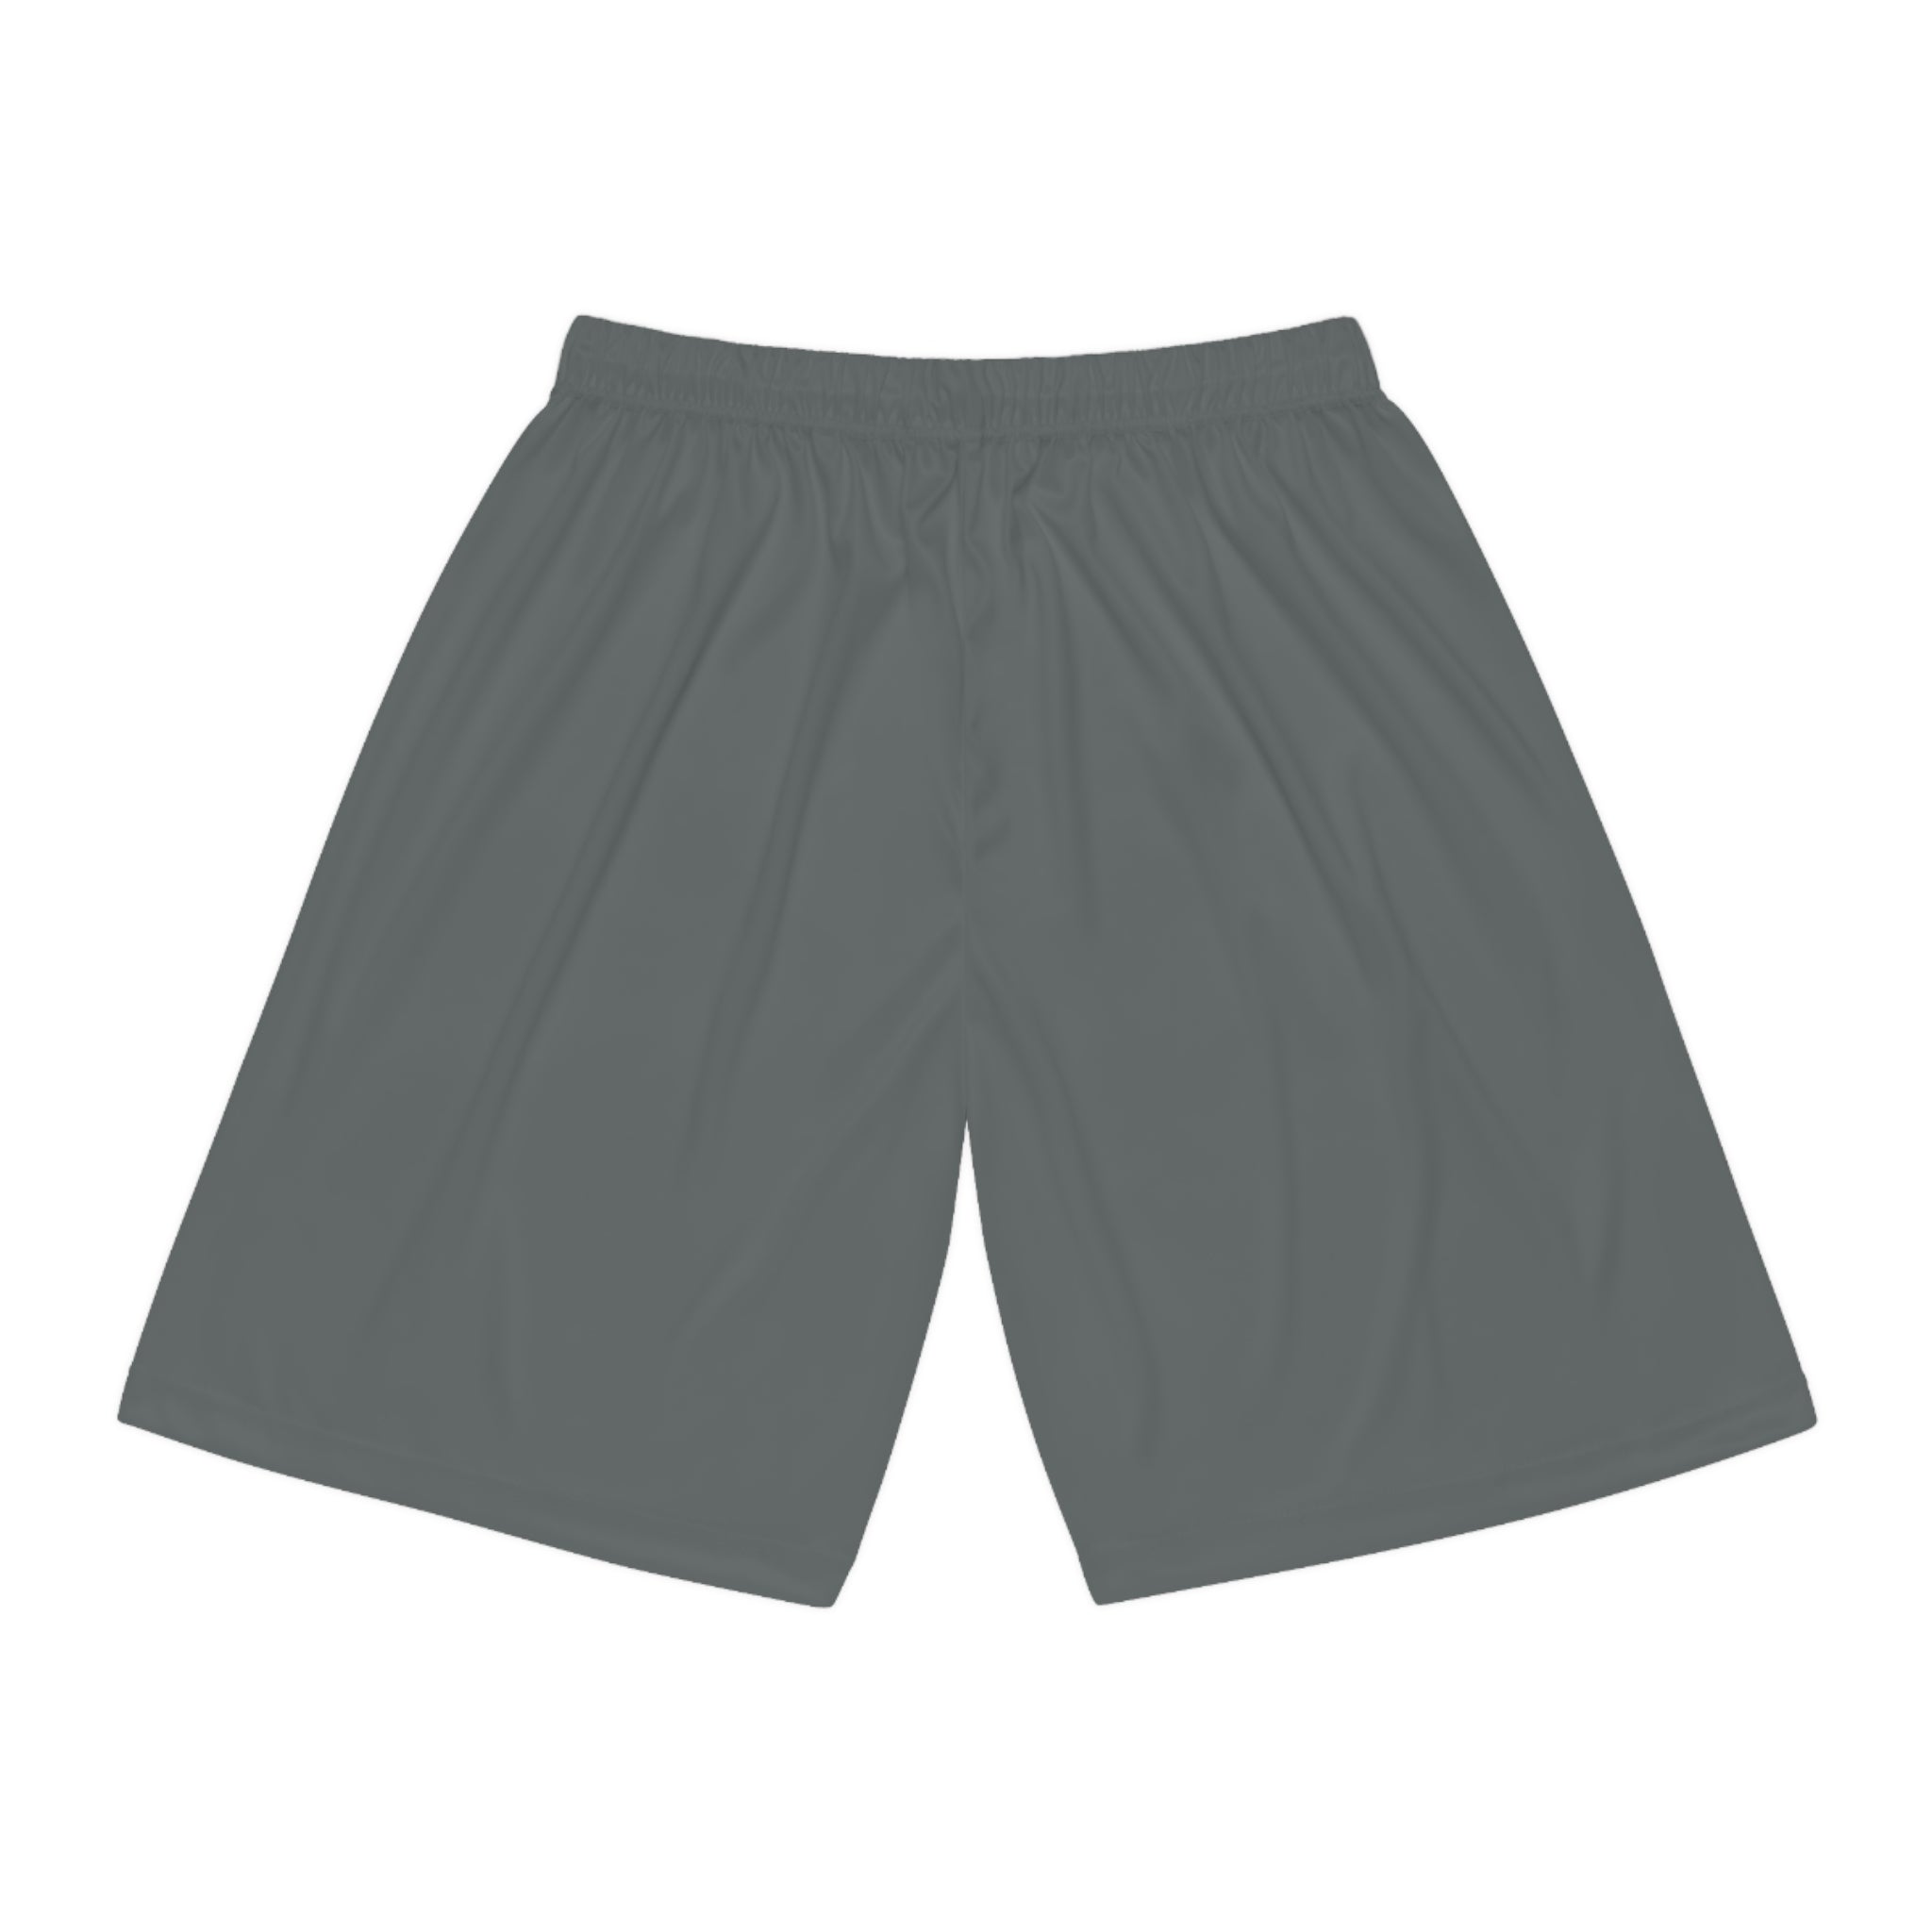 Do Not Look Here! Basketball Shorts (AOP)